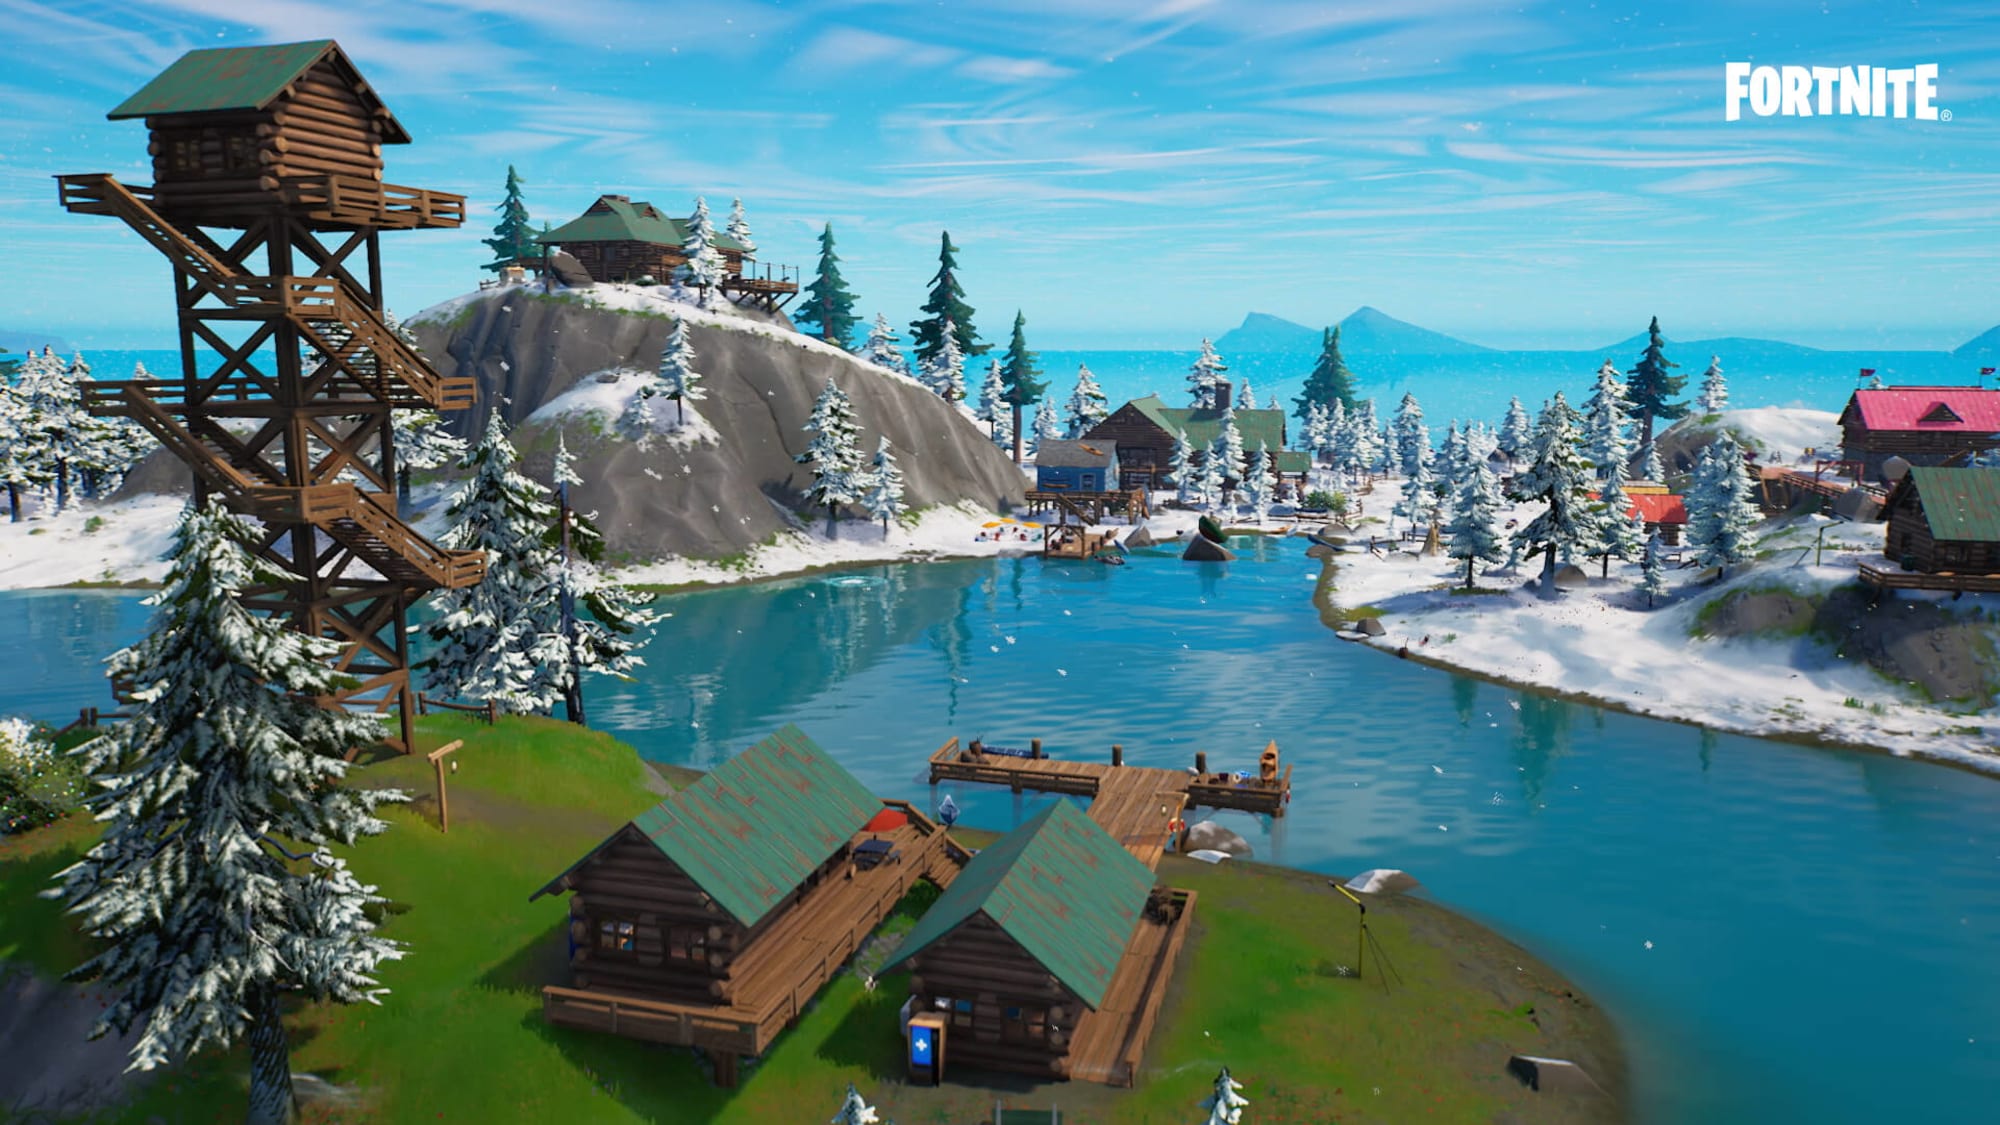 Could there be more surprises as the snow melts Fornite Chapter 3?